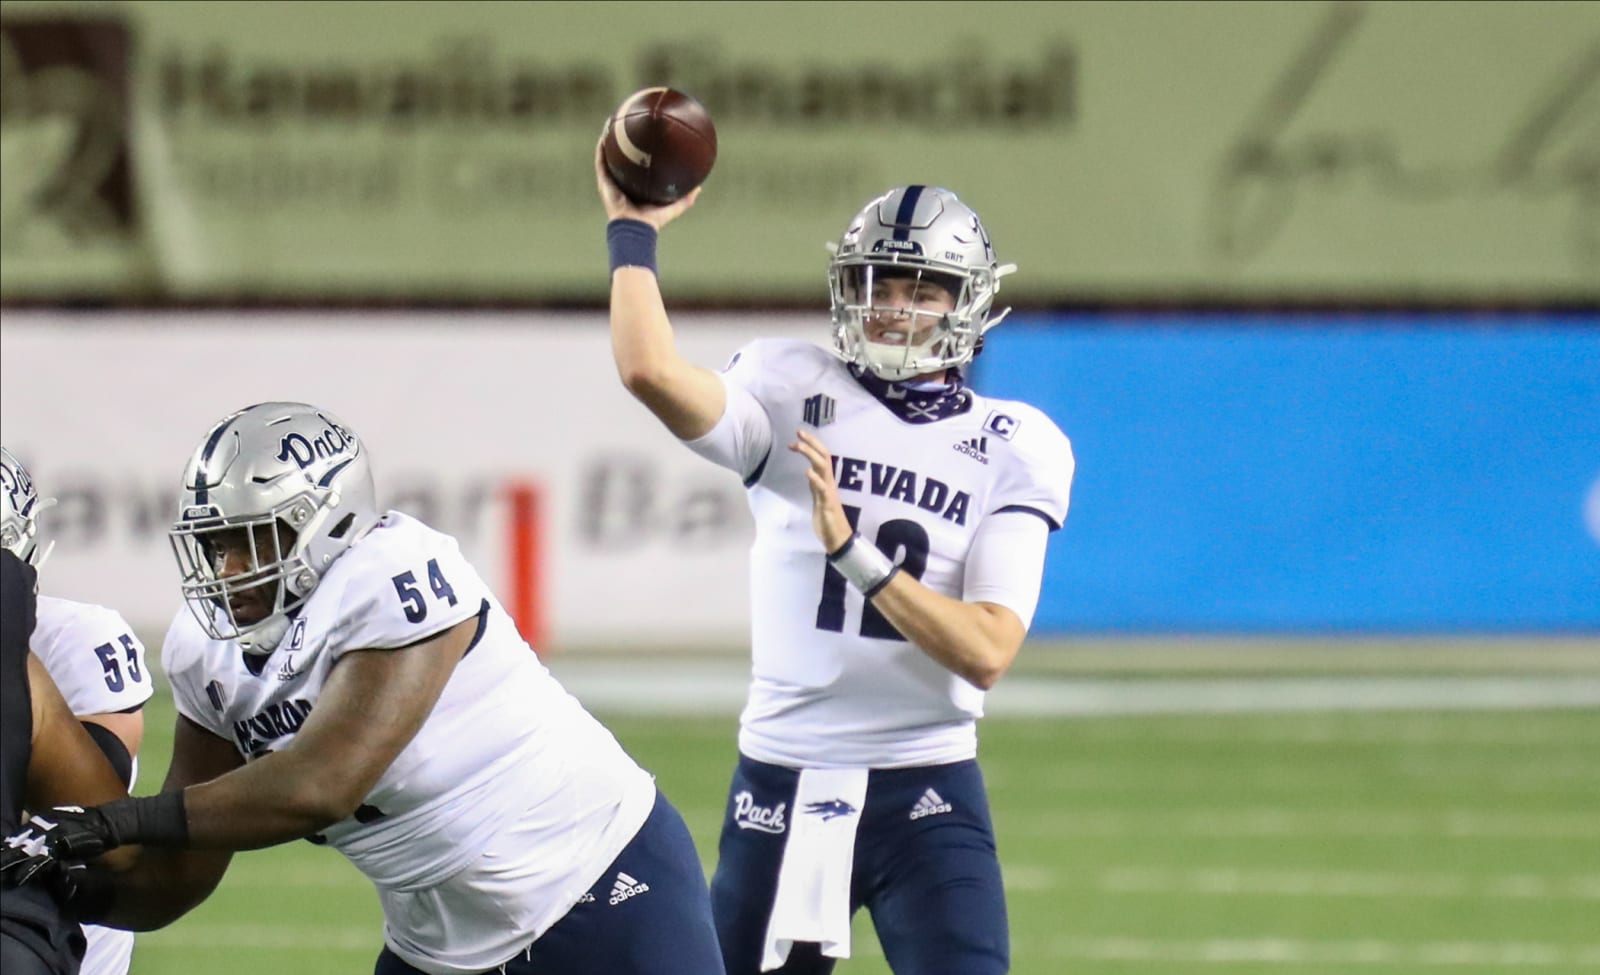 2022 NFL Draft: Nevada QB Carson Strong has loads of potential